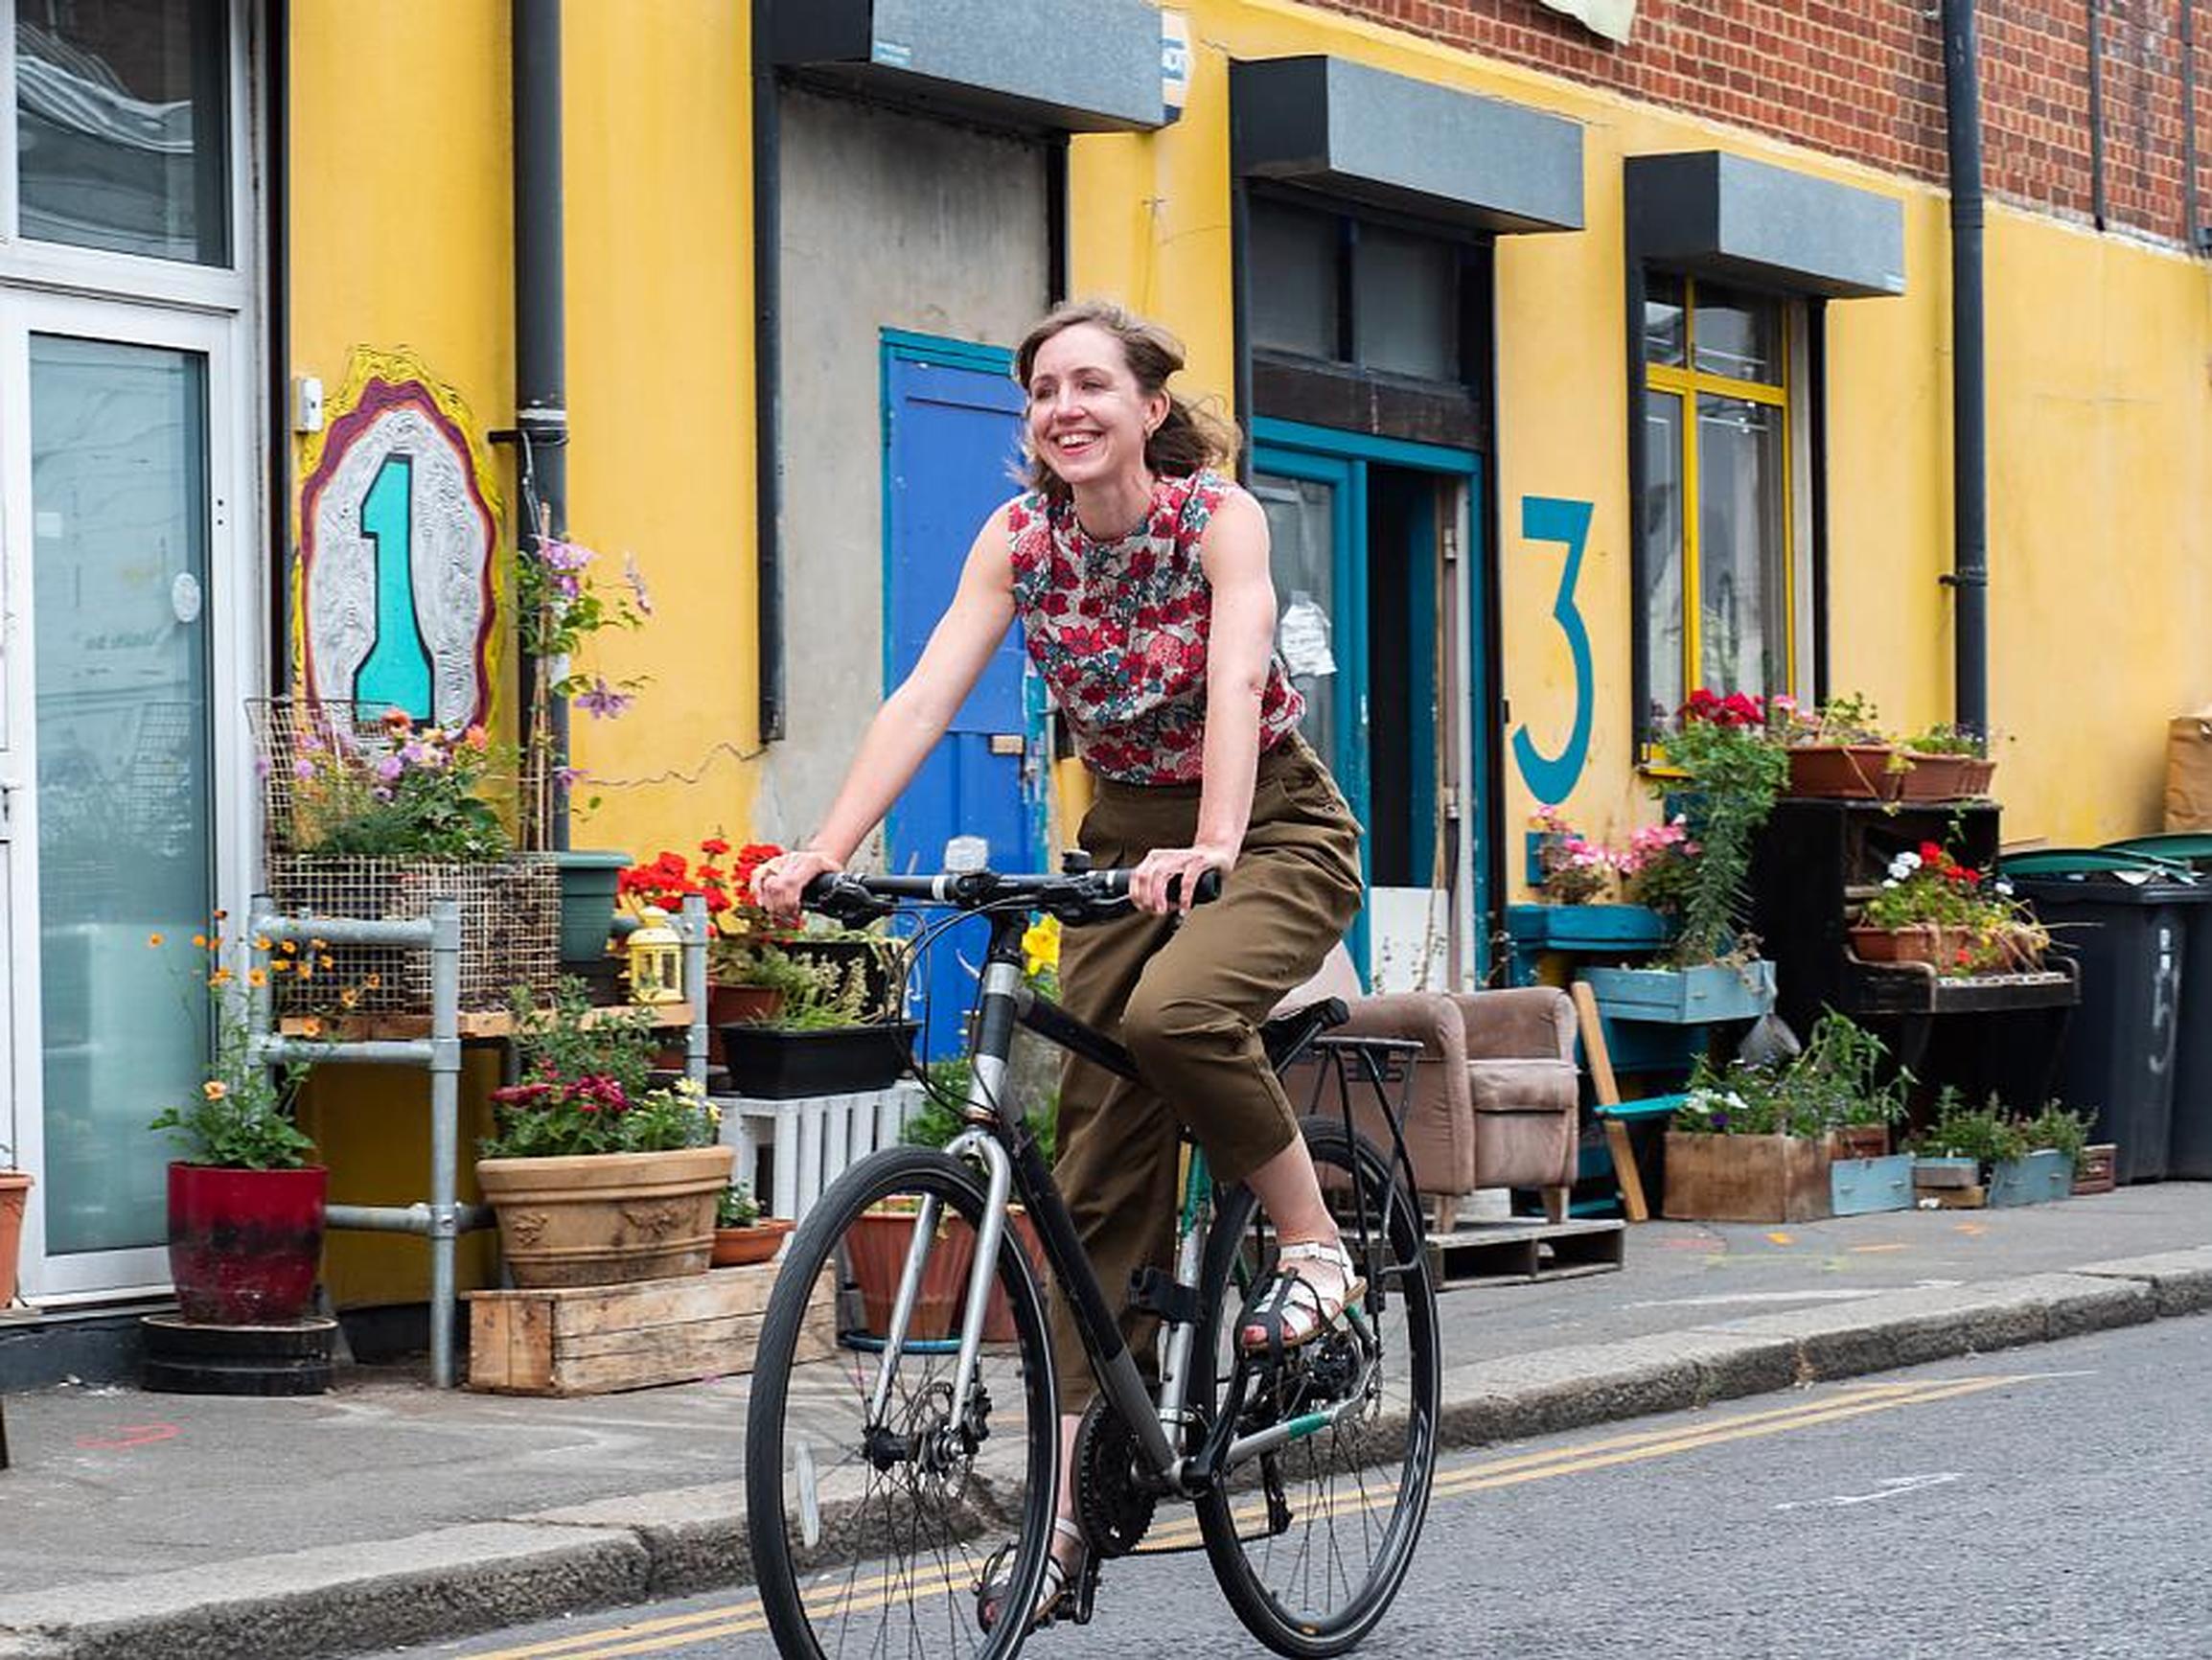 Sarah Mitchell: If the Government is serious about achieving its own goals for increasing cycling and walking levels it will have to give councils the opportunity to apply for substantially more funding which is committed over the longer term